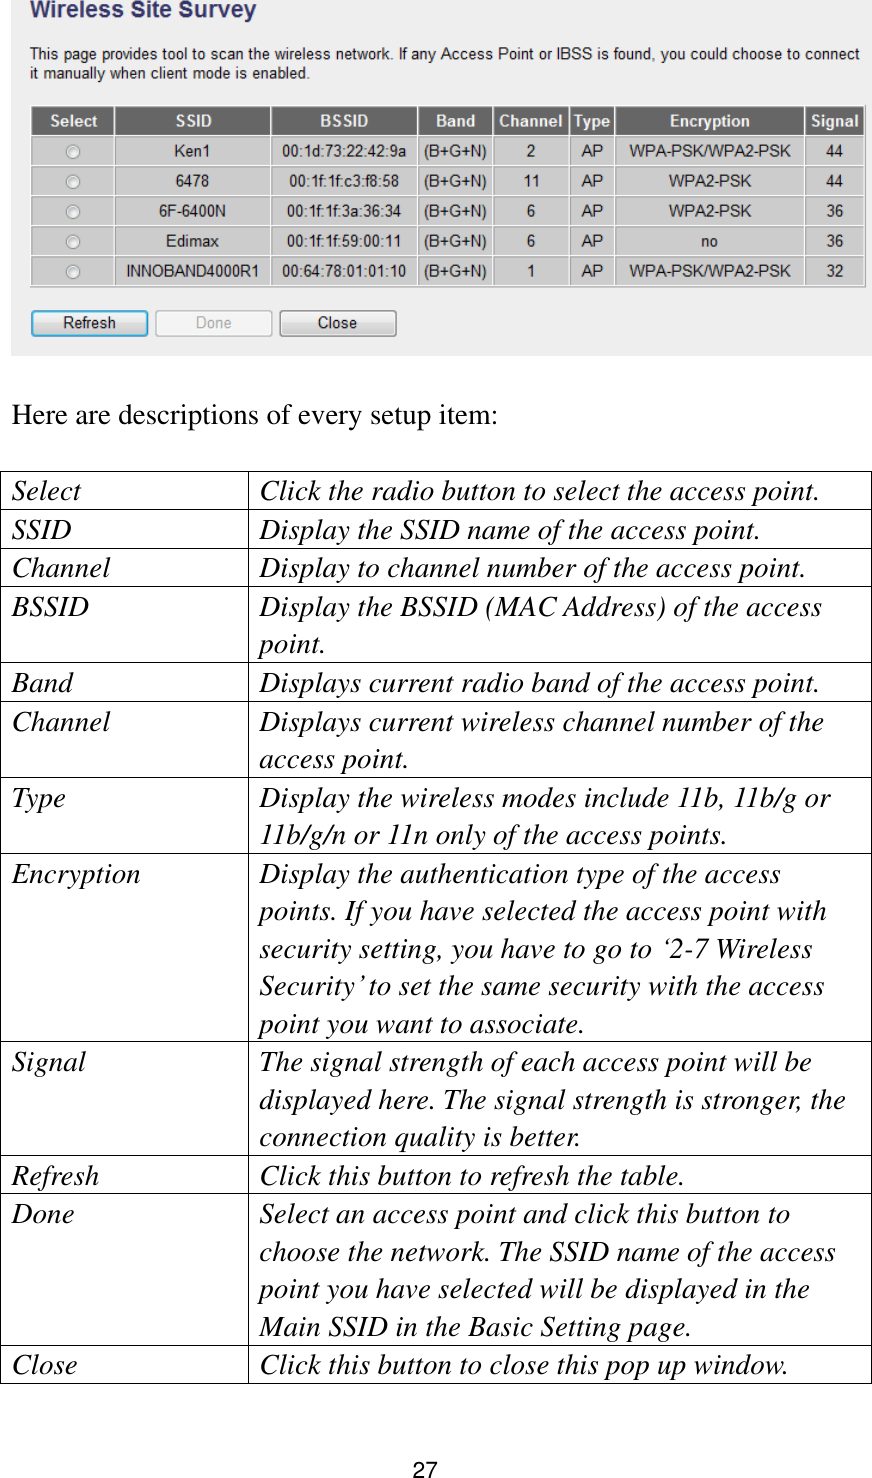 27   Here are descriptions of every setup item:  Select Click the radio button to select the access point. SSID Display the SSID name of the access point. Channel Display to channel number of the access point. BSSID Display the BSSID (MAC Address) of the access point. Band Displays current radio band of the access point. Channel Displays current wireless channel number of the access point. Type Display the wireless modes include 11b, 11b/g or 11b/g/n or 11n only of the access points. Encryption Display the authentication type of the access points. If you have selected the access point with security setting, you have to go to „2-7 Wireless Security‟ to set the same security with the access point you want to associate. Signal   The signal strength of each access point will be displayed here. The signal strength is stronger, the connection quality is better. Refresh Click this button to refresh the table. Done Select an access point and click this button to choose the network. The SSID name of the access point you have selected will be displayed in the Main SSID in the Basic Setting page.   Close Click this button to close this pop up window.  